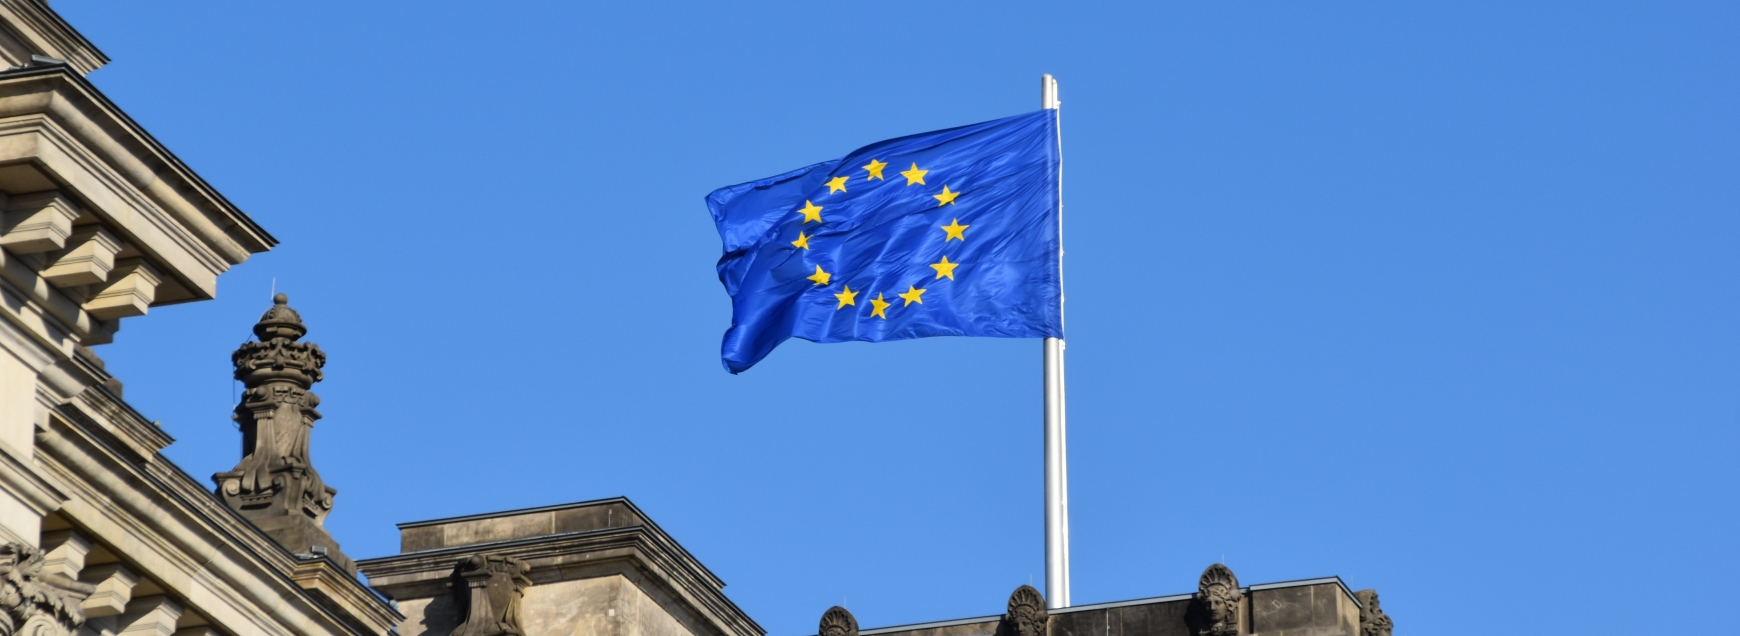 European flag flying above a building with a blue sky background